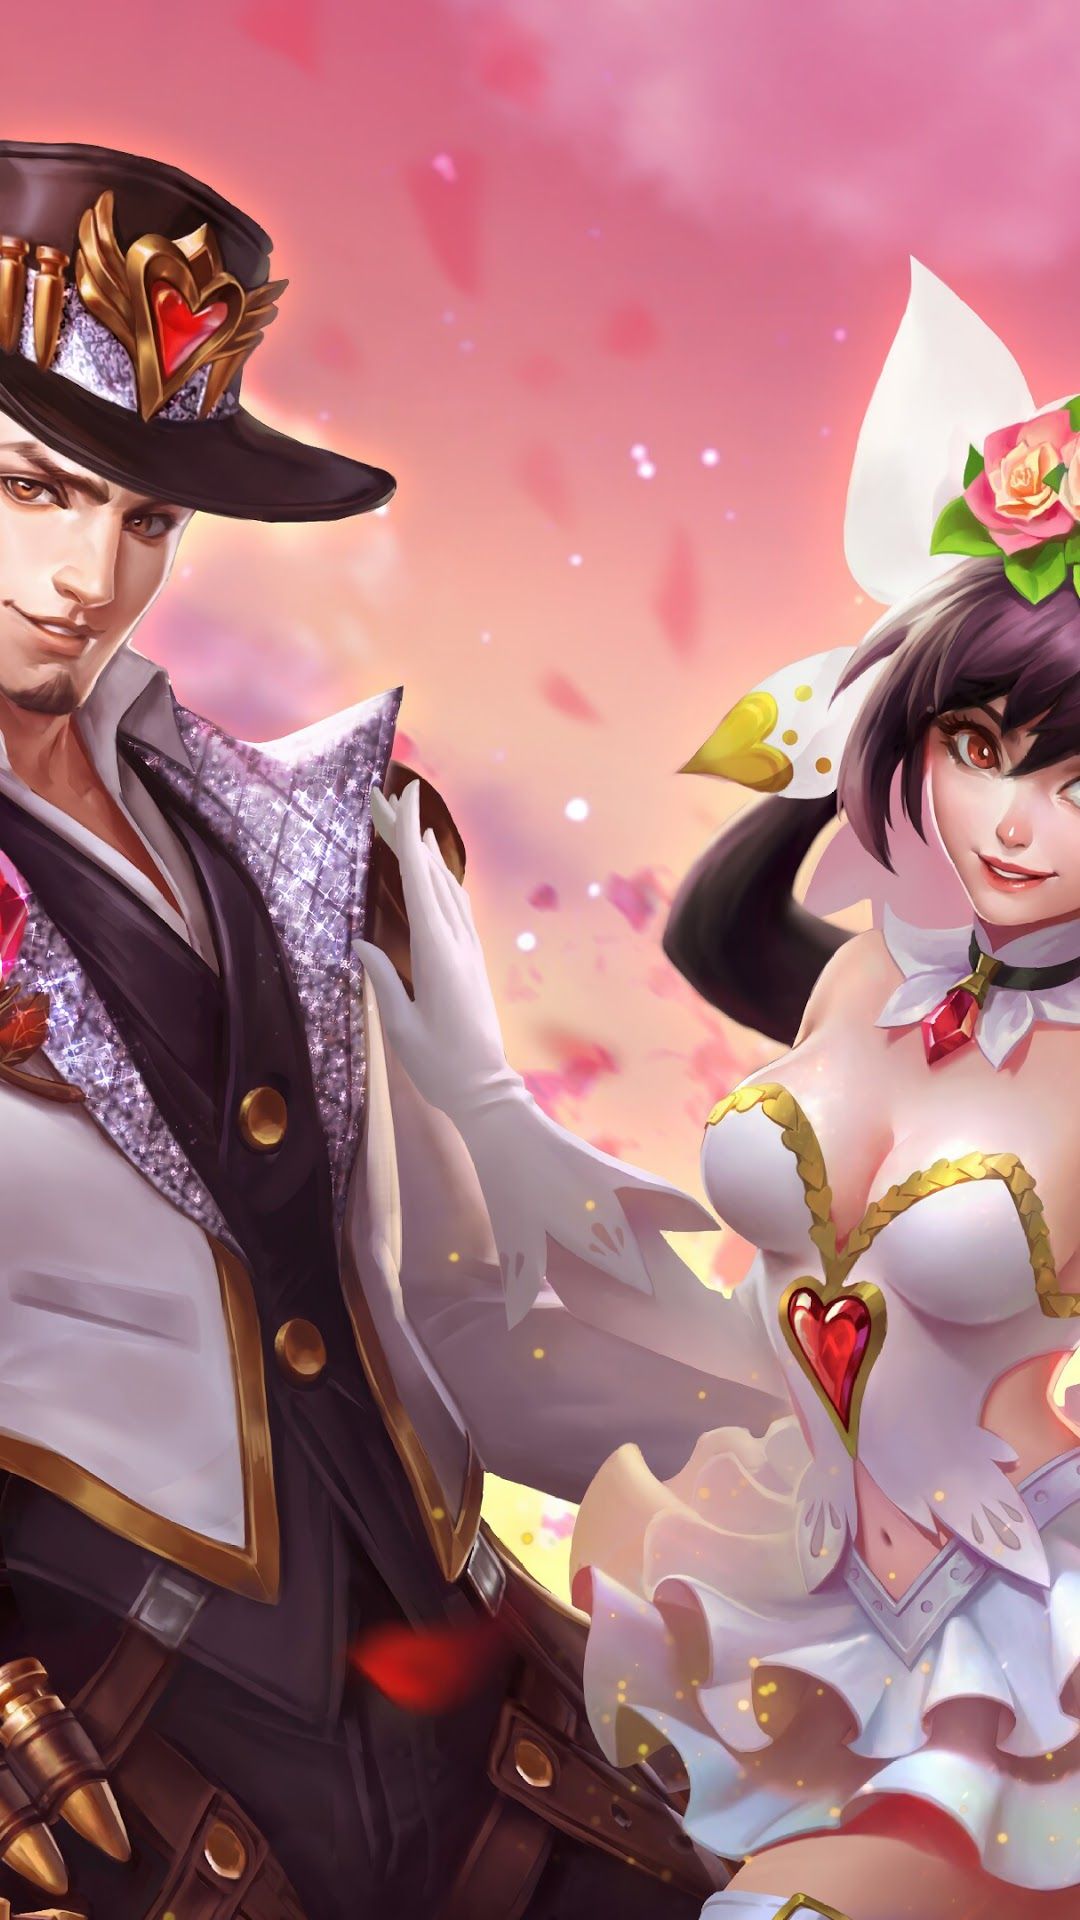 Clint, Gun and Roses, Layla, Cannon and Roses, Skins, Mobile Legends phone HD Wallpaper, Image, Background, Photo and Picture